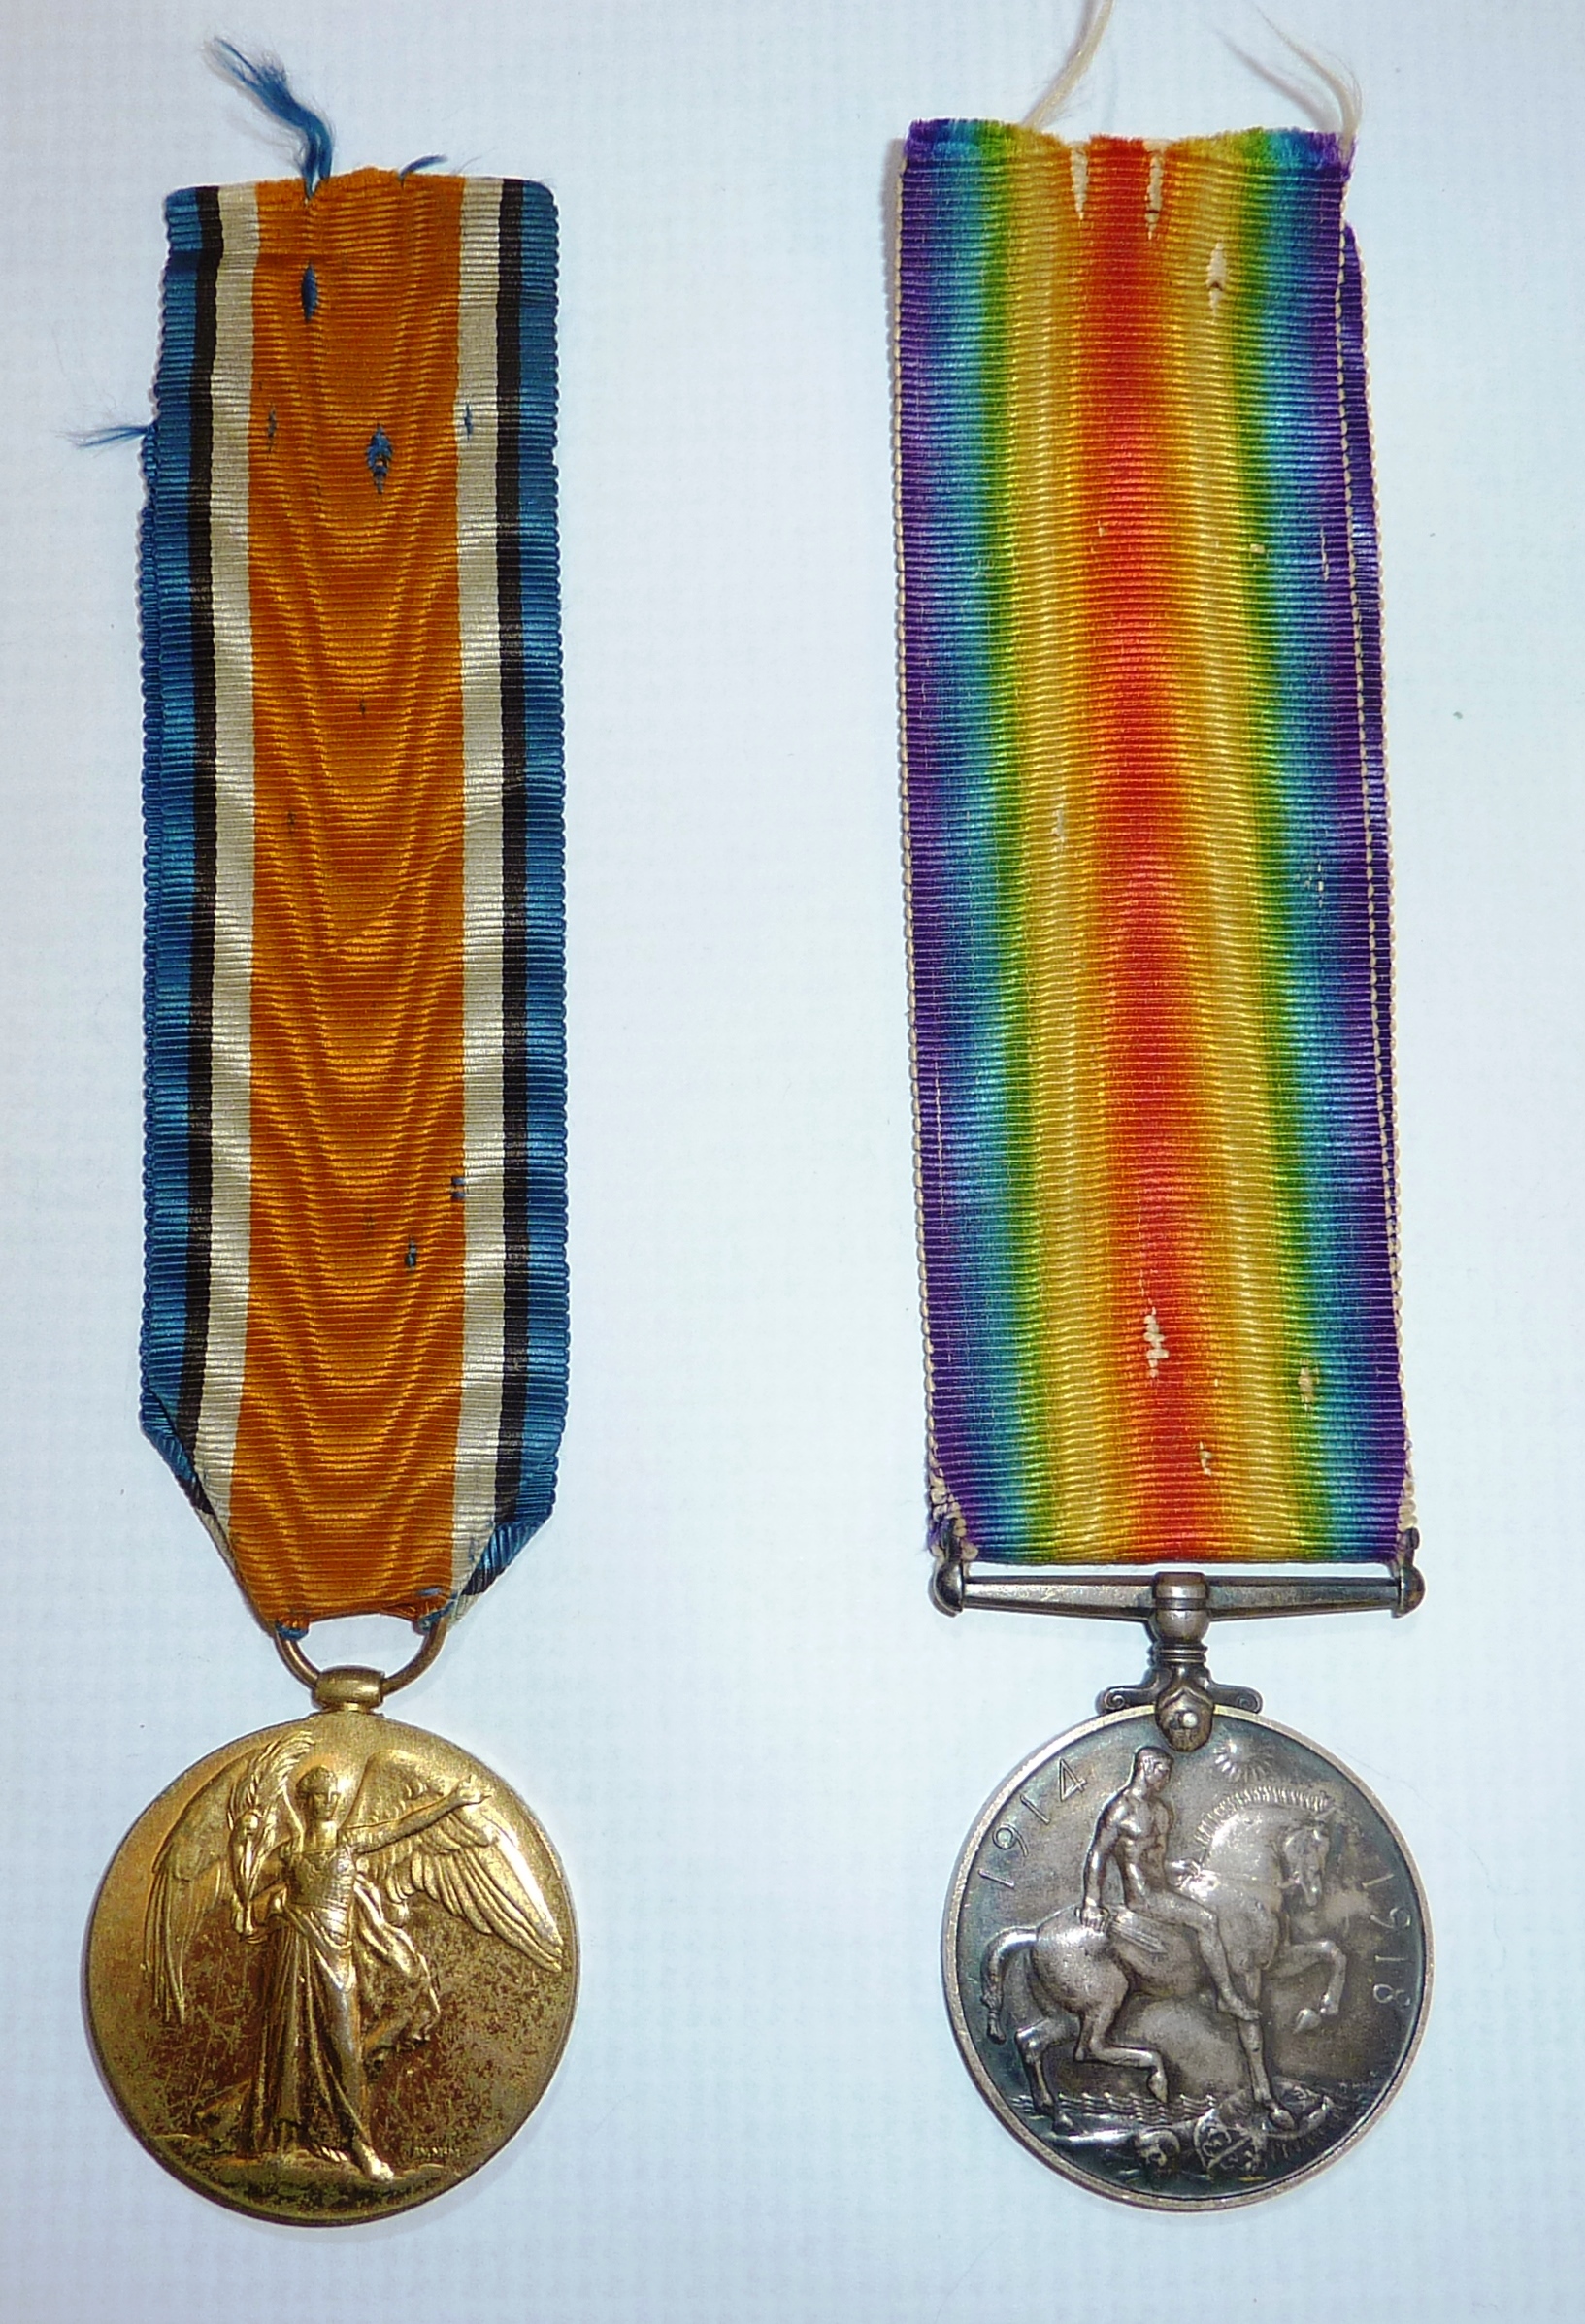 WWI pair comprising of British war medal and victory medal awarded to '1302ES G.W.POWDRILL ENGN.